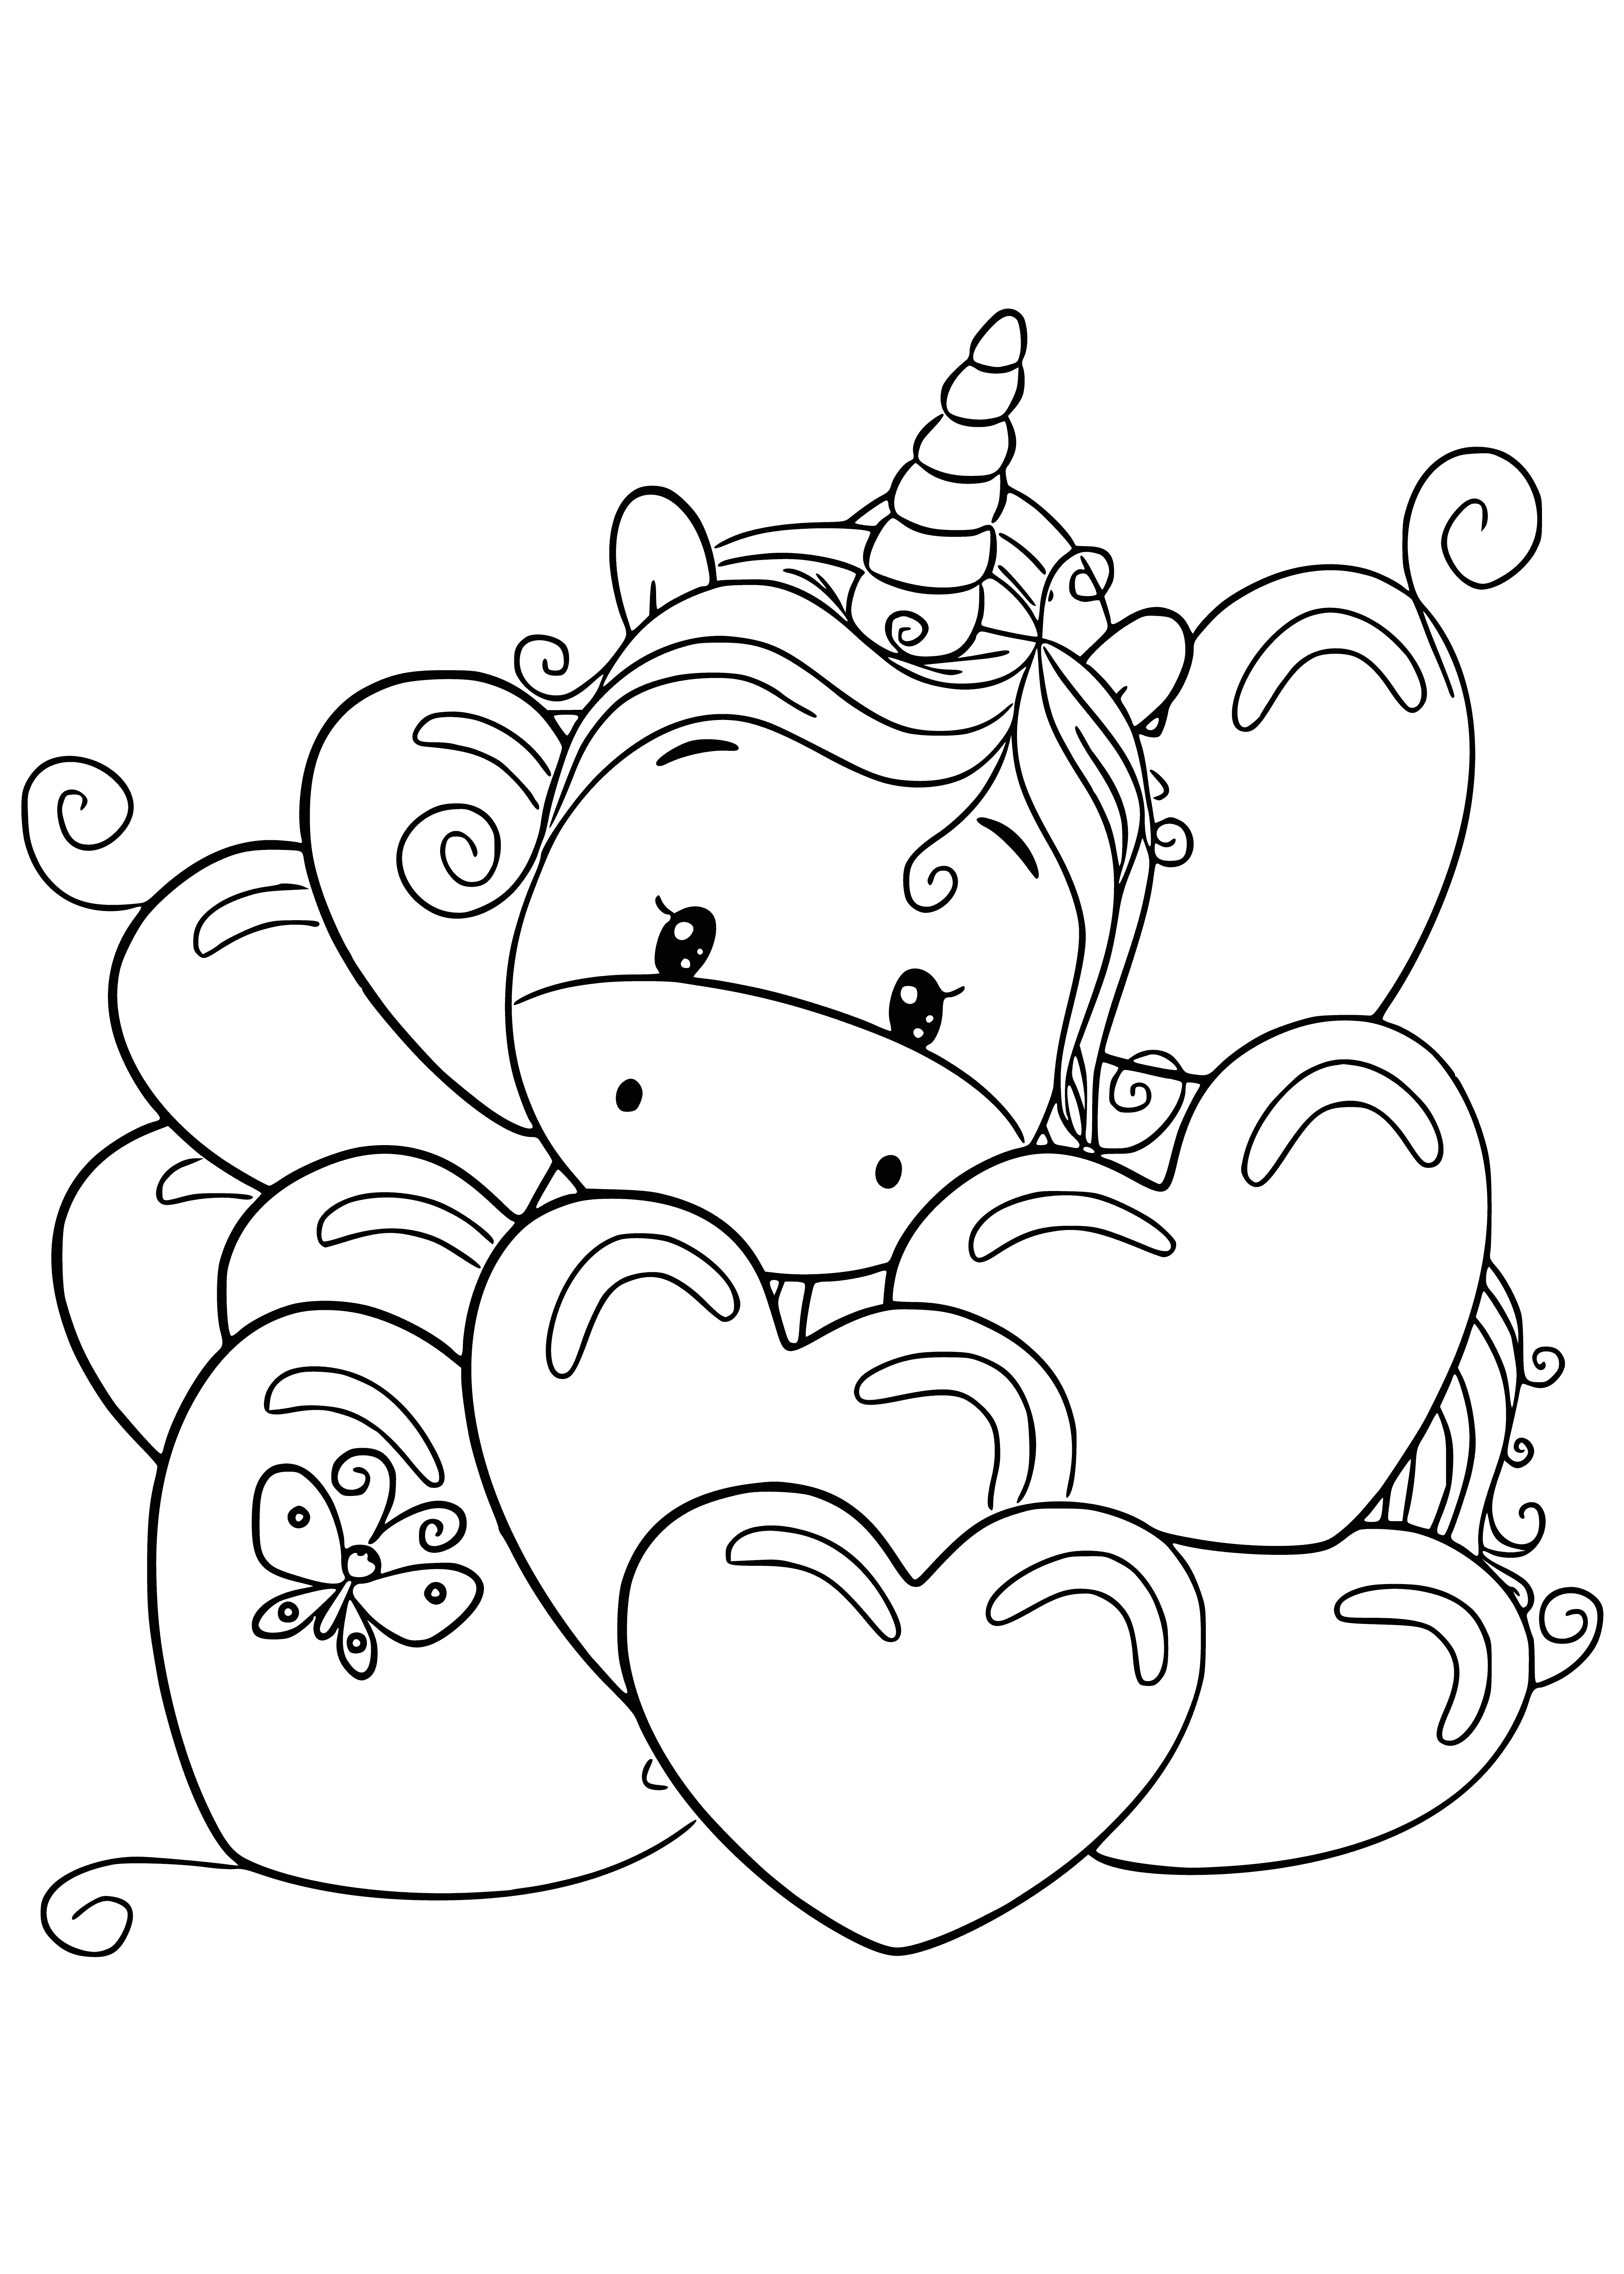 Unicorn in love coloring page